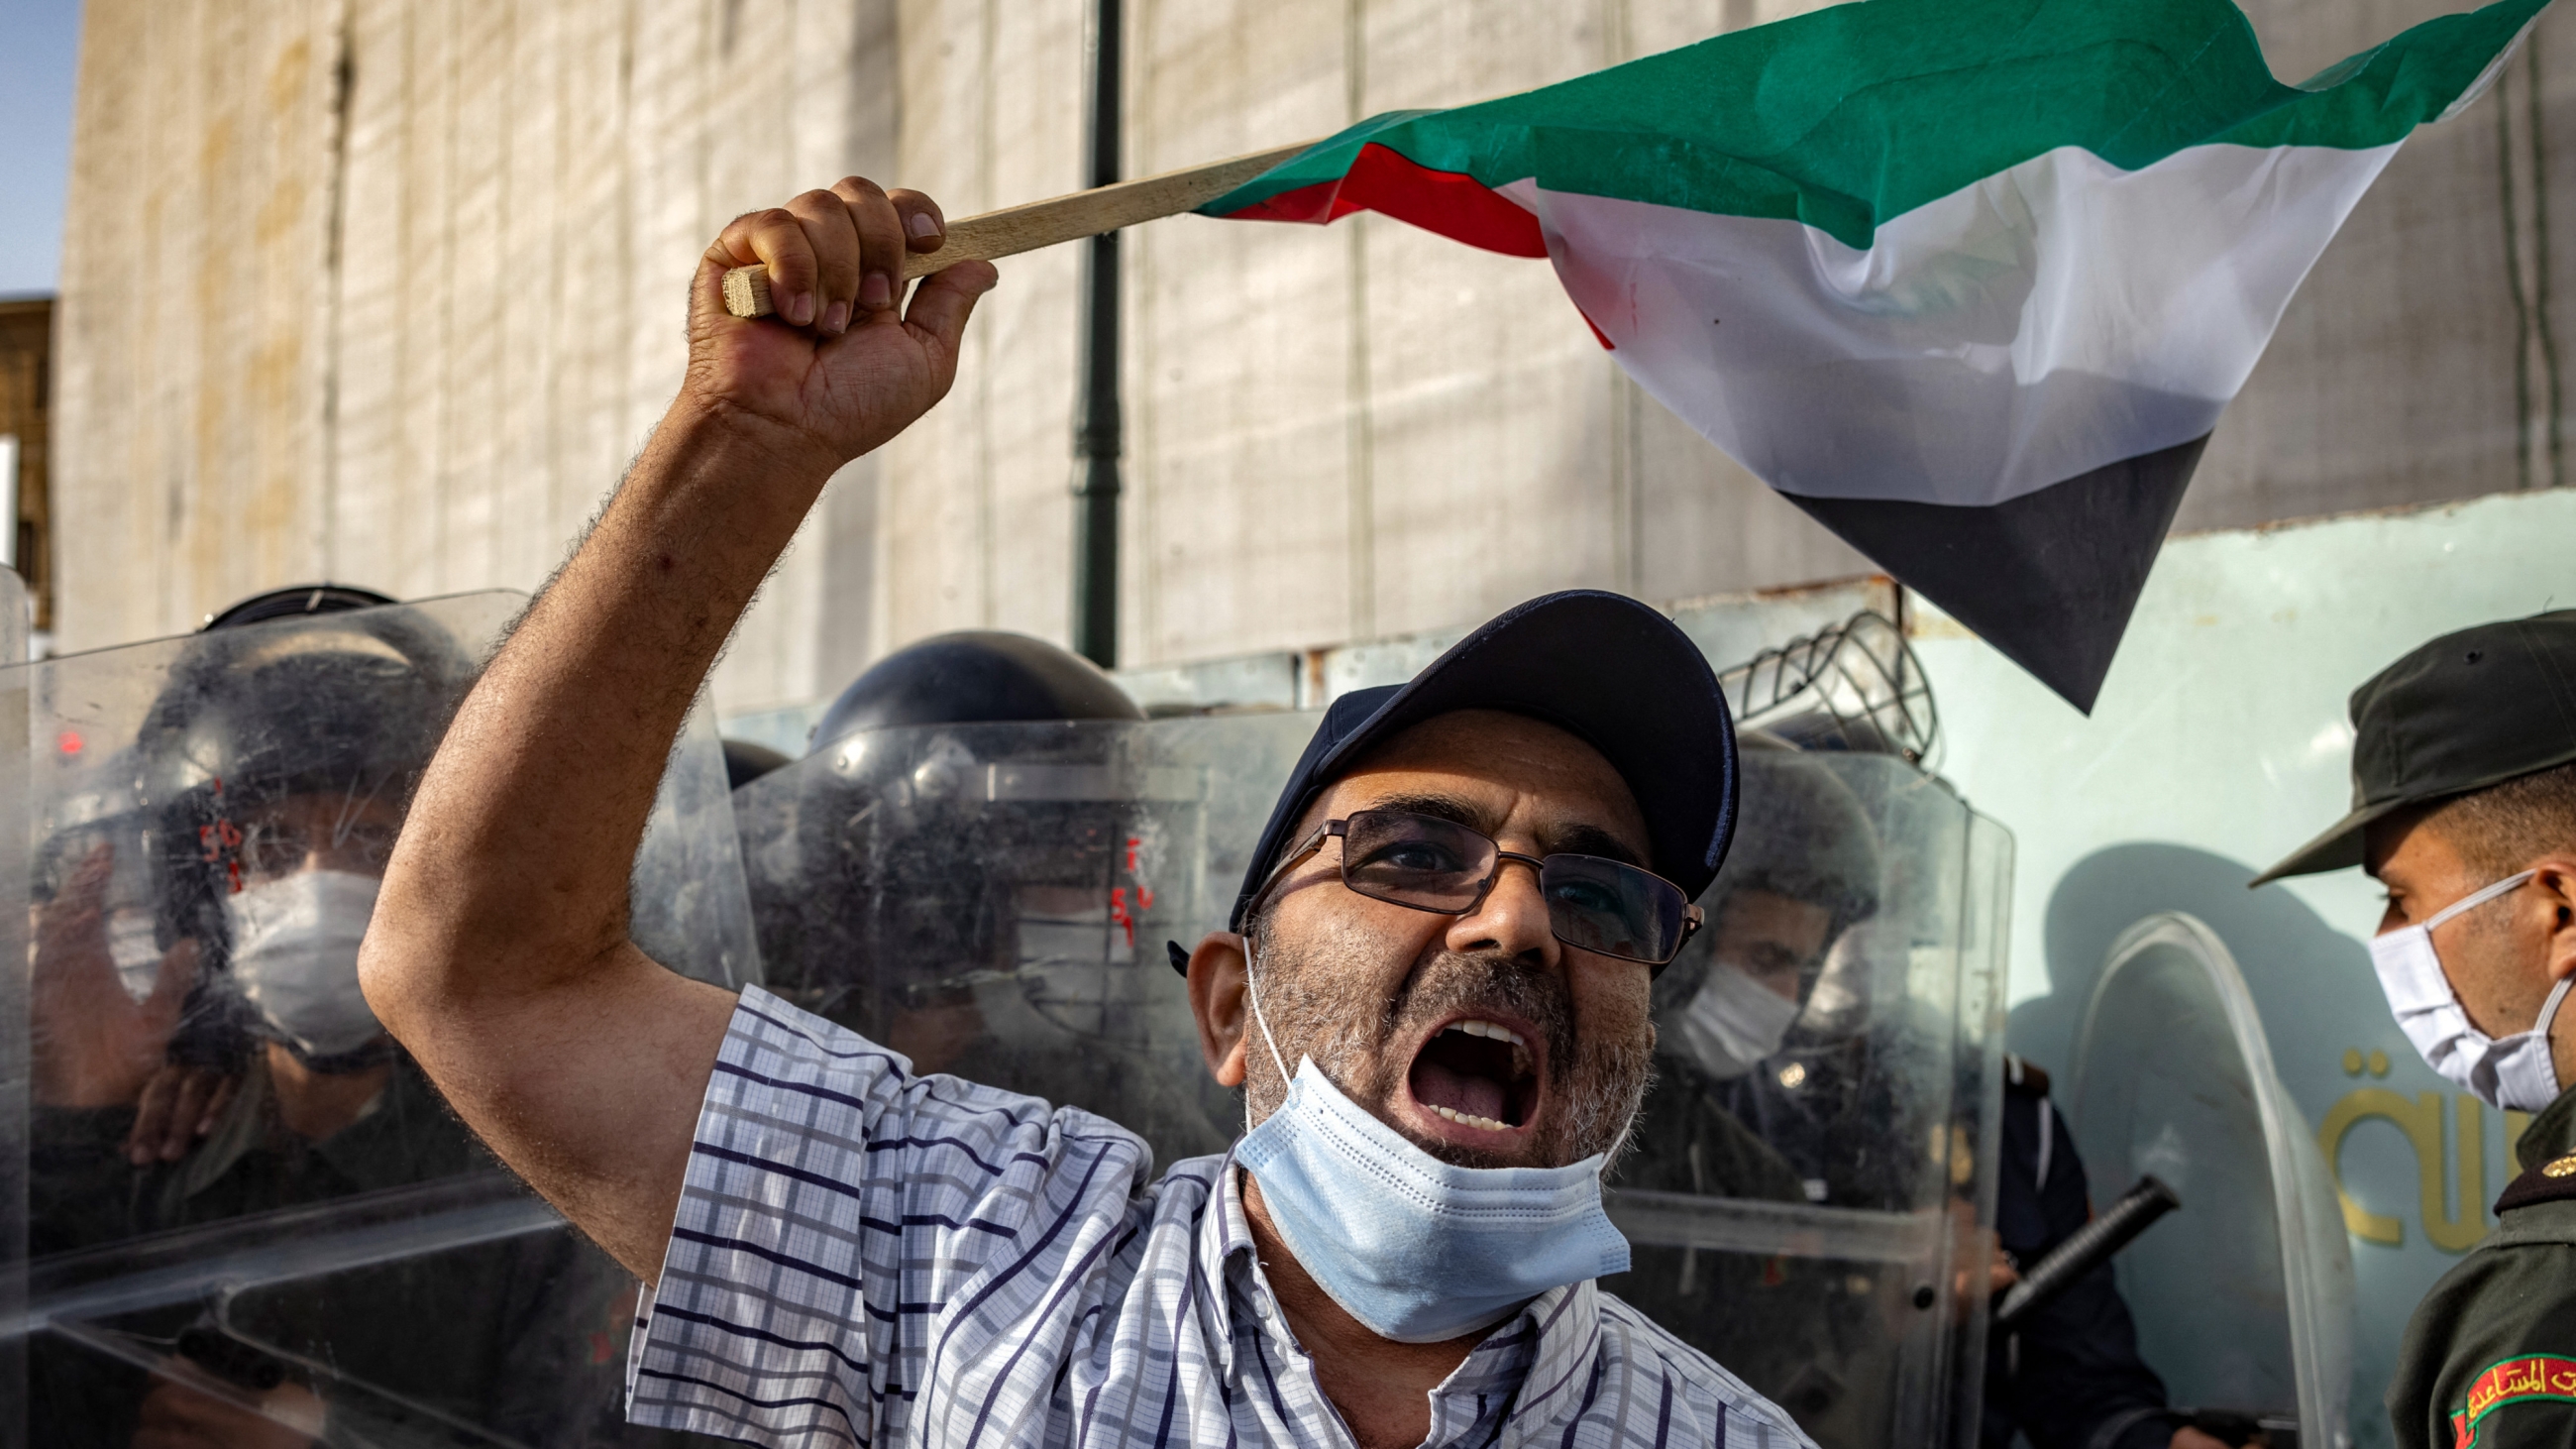 A man waving a Palestinian flag at a protest calling for an end to Israeli violence in Gaza and against the normalisation with Israel, in the Moroccan capital Rabat on 16 May 2021 (AFP)